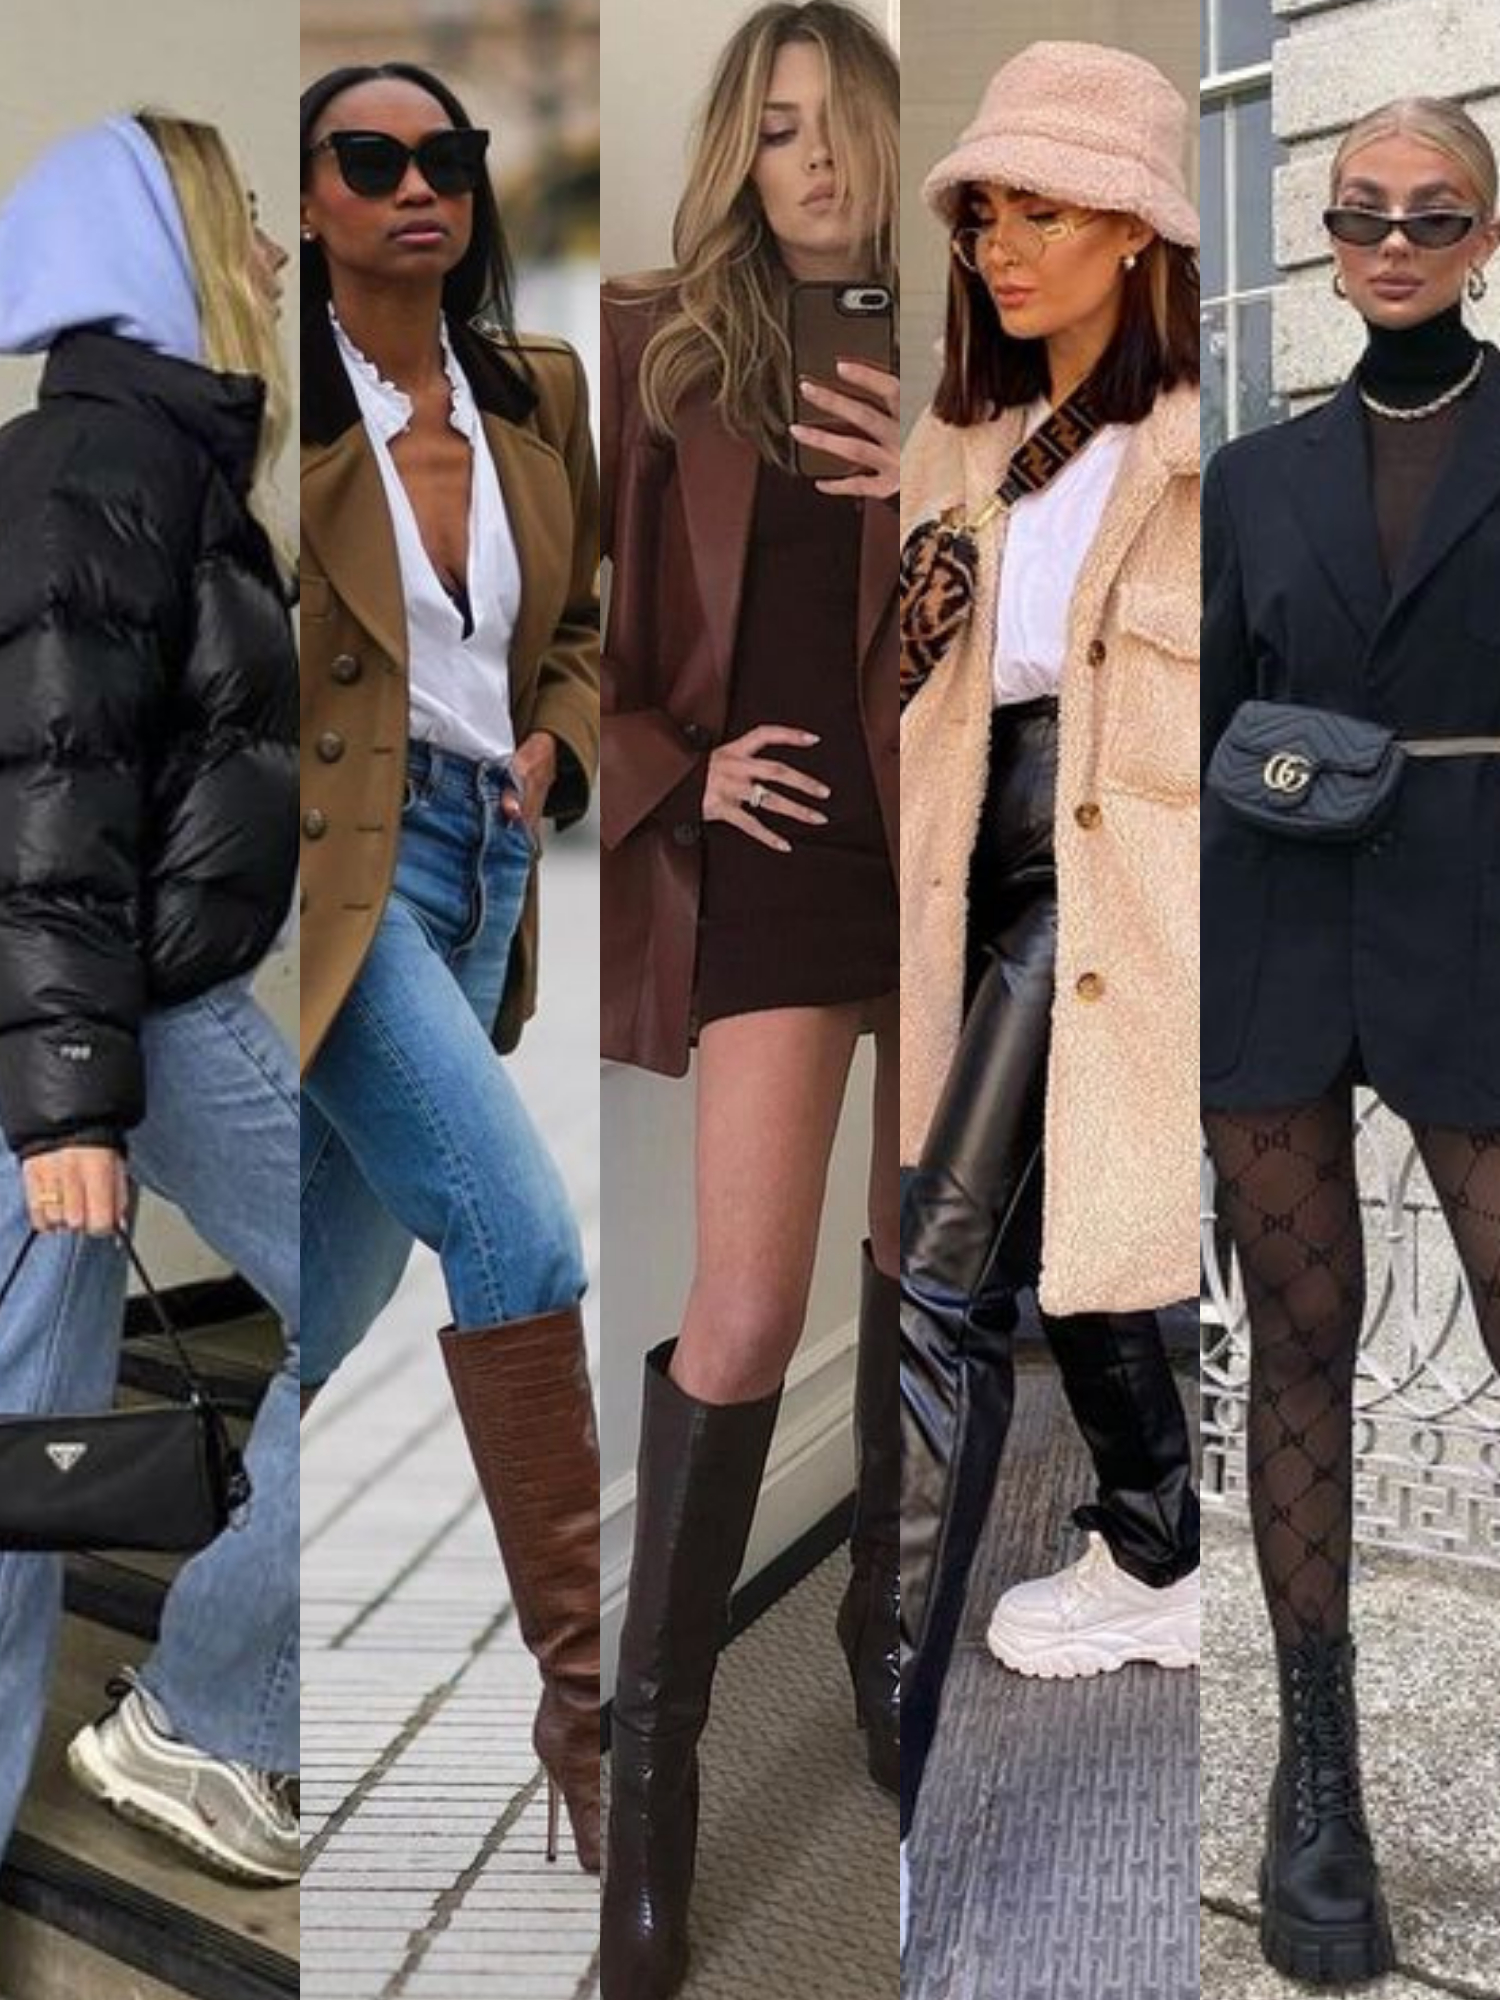 We're Bringing These 5 Stunning Winter Fashion Trends Into 2022